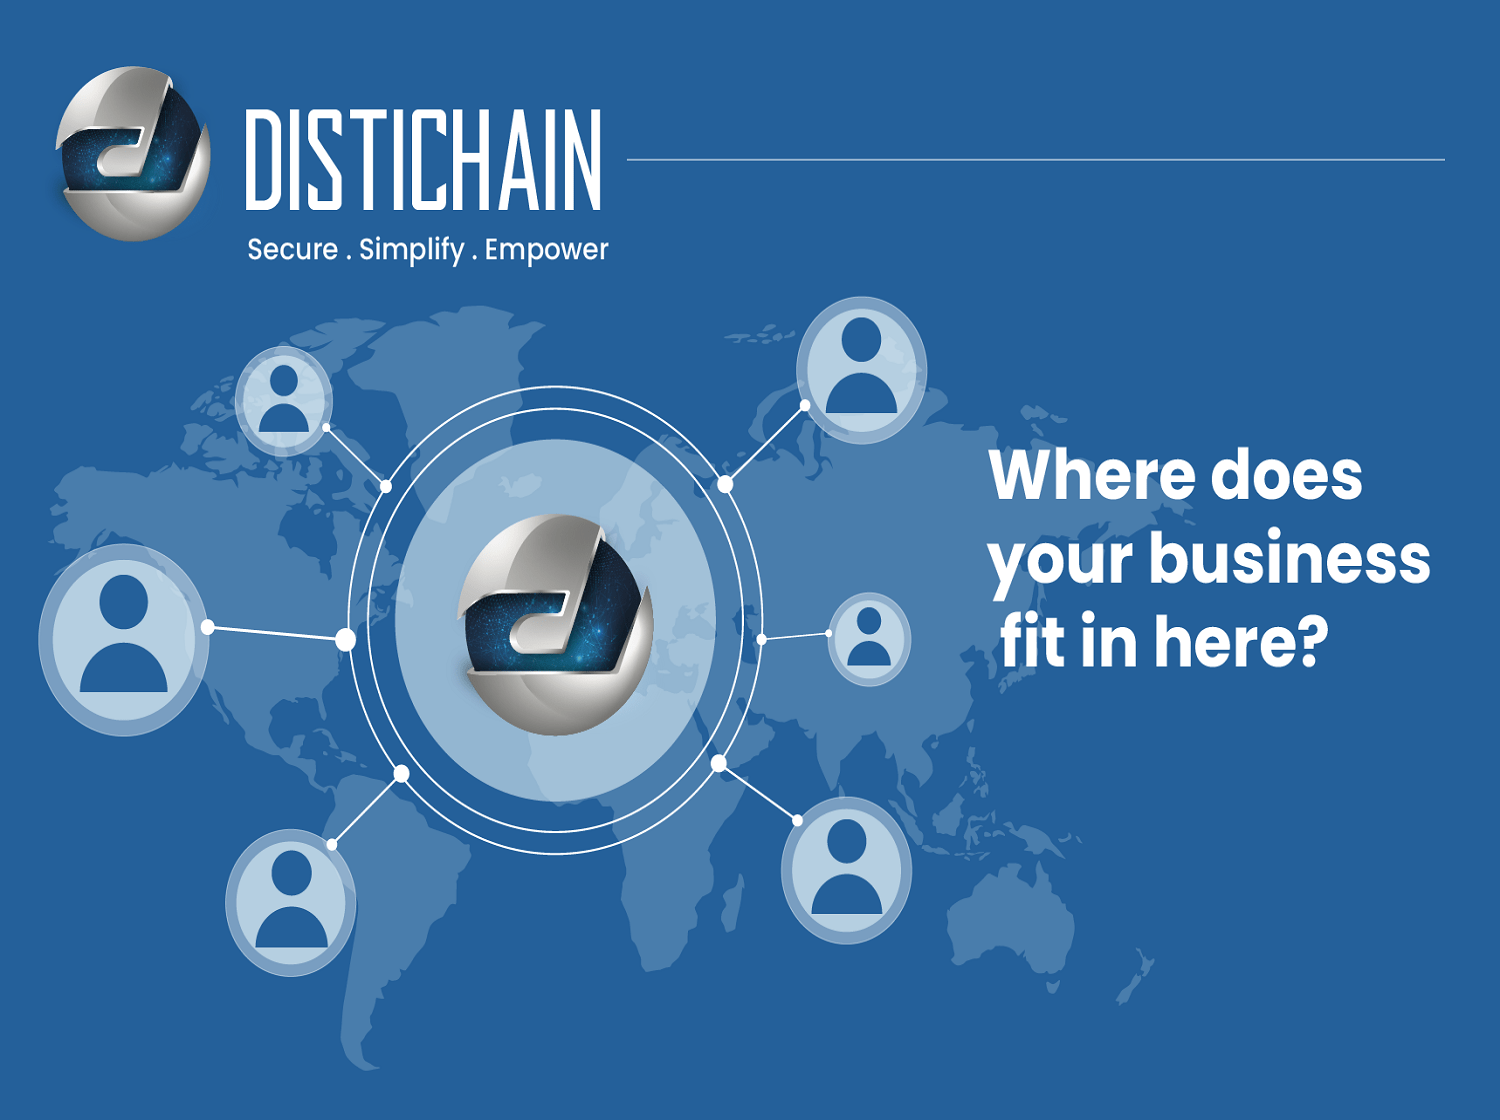 Distichain article on where does your business fit in here